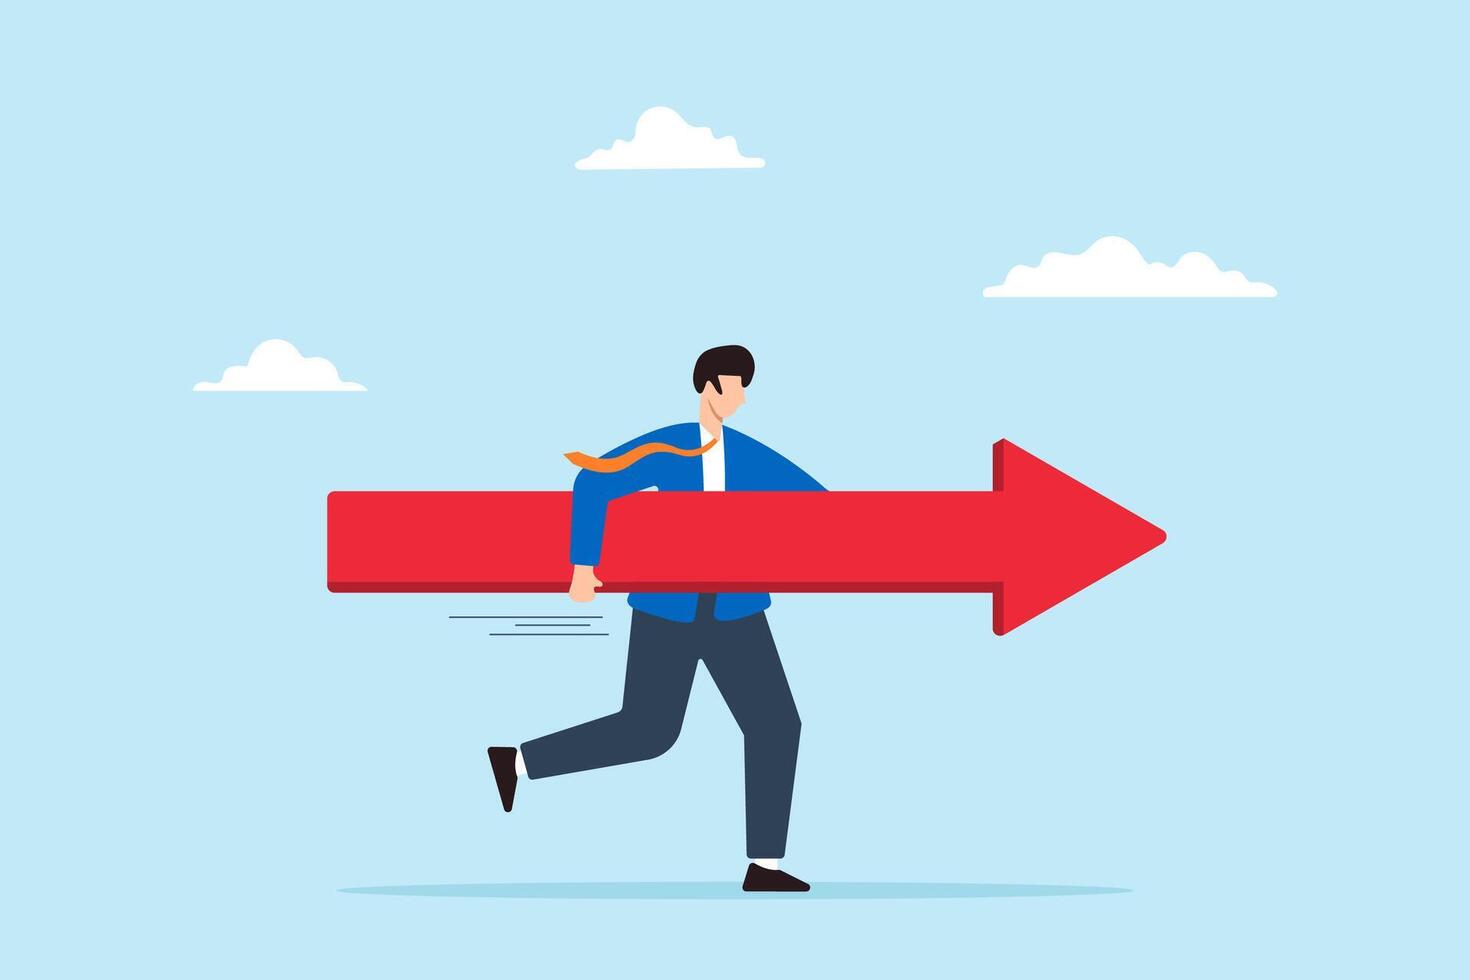 Businessman runs forward with arrow sign, illustrating progress towards success. Concept of determination, courage, and direction of business, career path, or pursuit of opportunities and missions vector